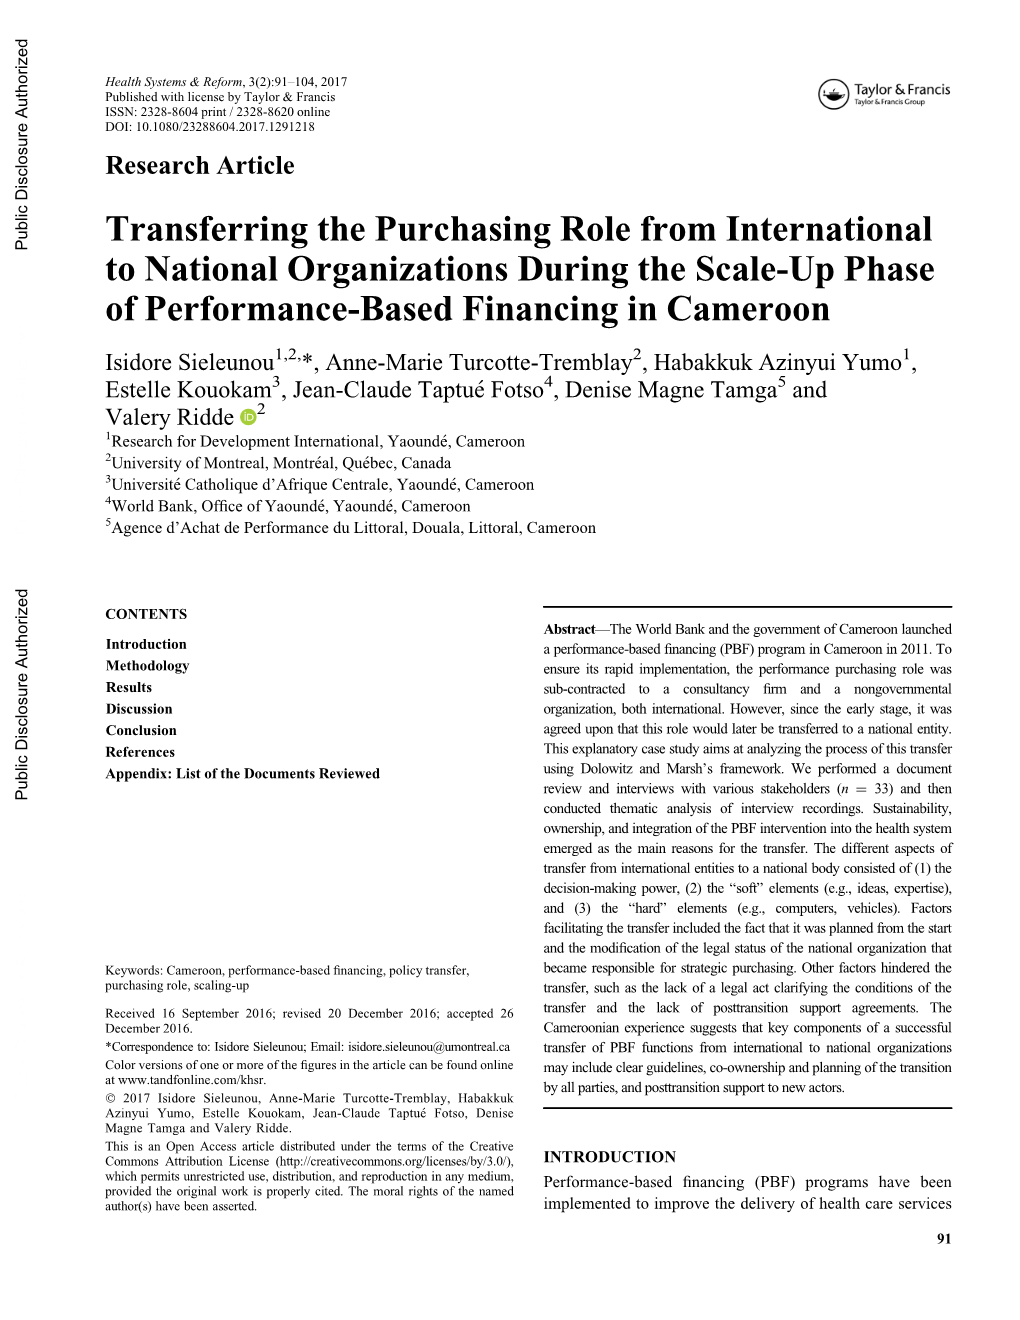 Transferring the Purchasing Role from International to National Organizations During the Scale-Up Phase of Performance-Based Financing in Cameroon